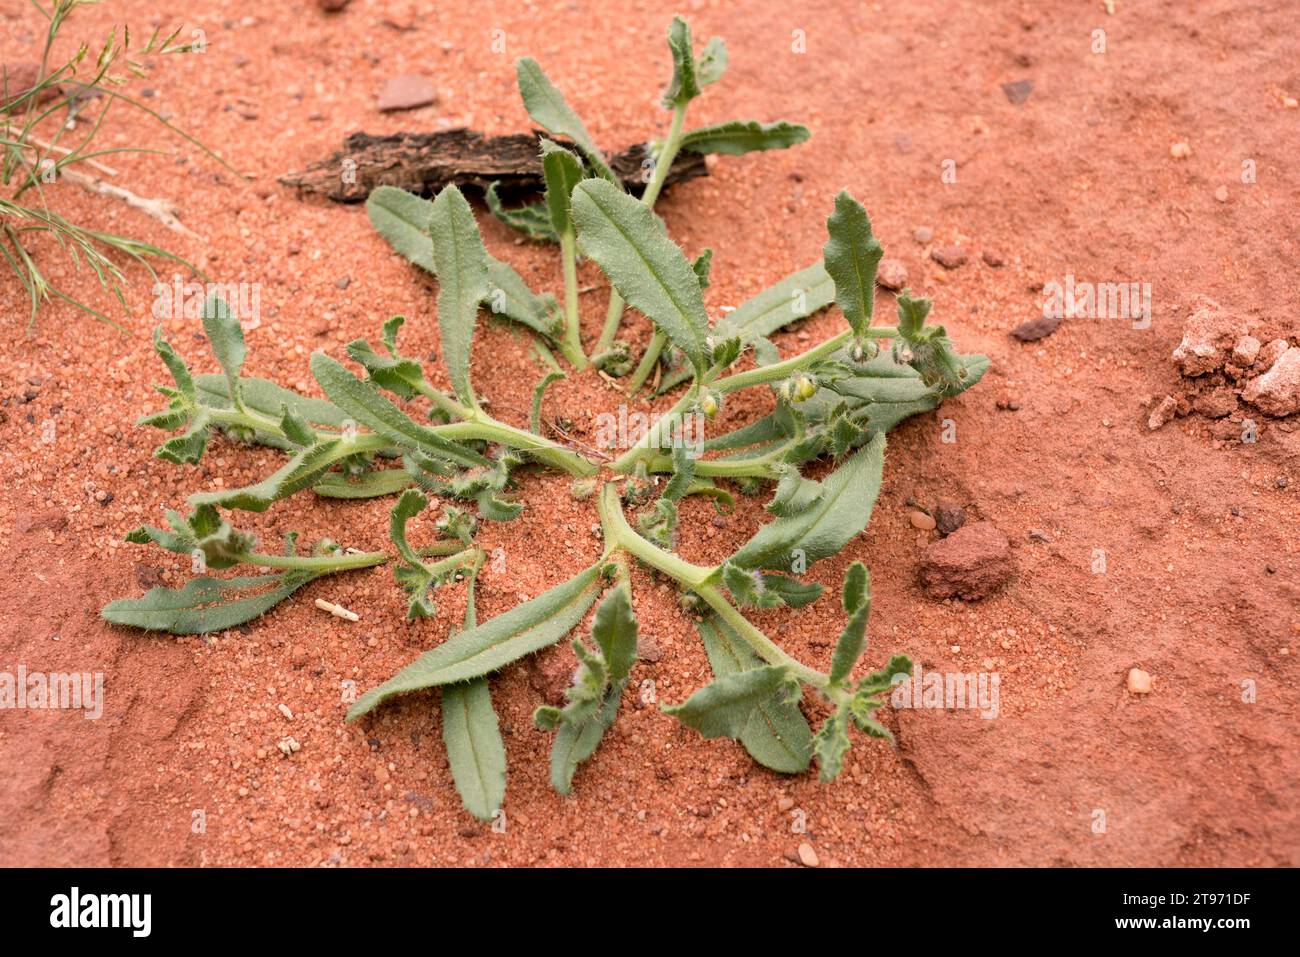 Trichodesma africanum is an annual herb native to deserts regions of Africa and West Asia. This photo was taken in Wadi Rum Desert, Jordan. Stock Photo